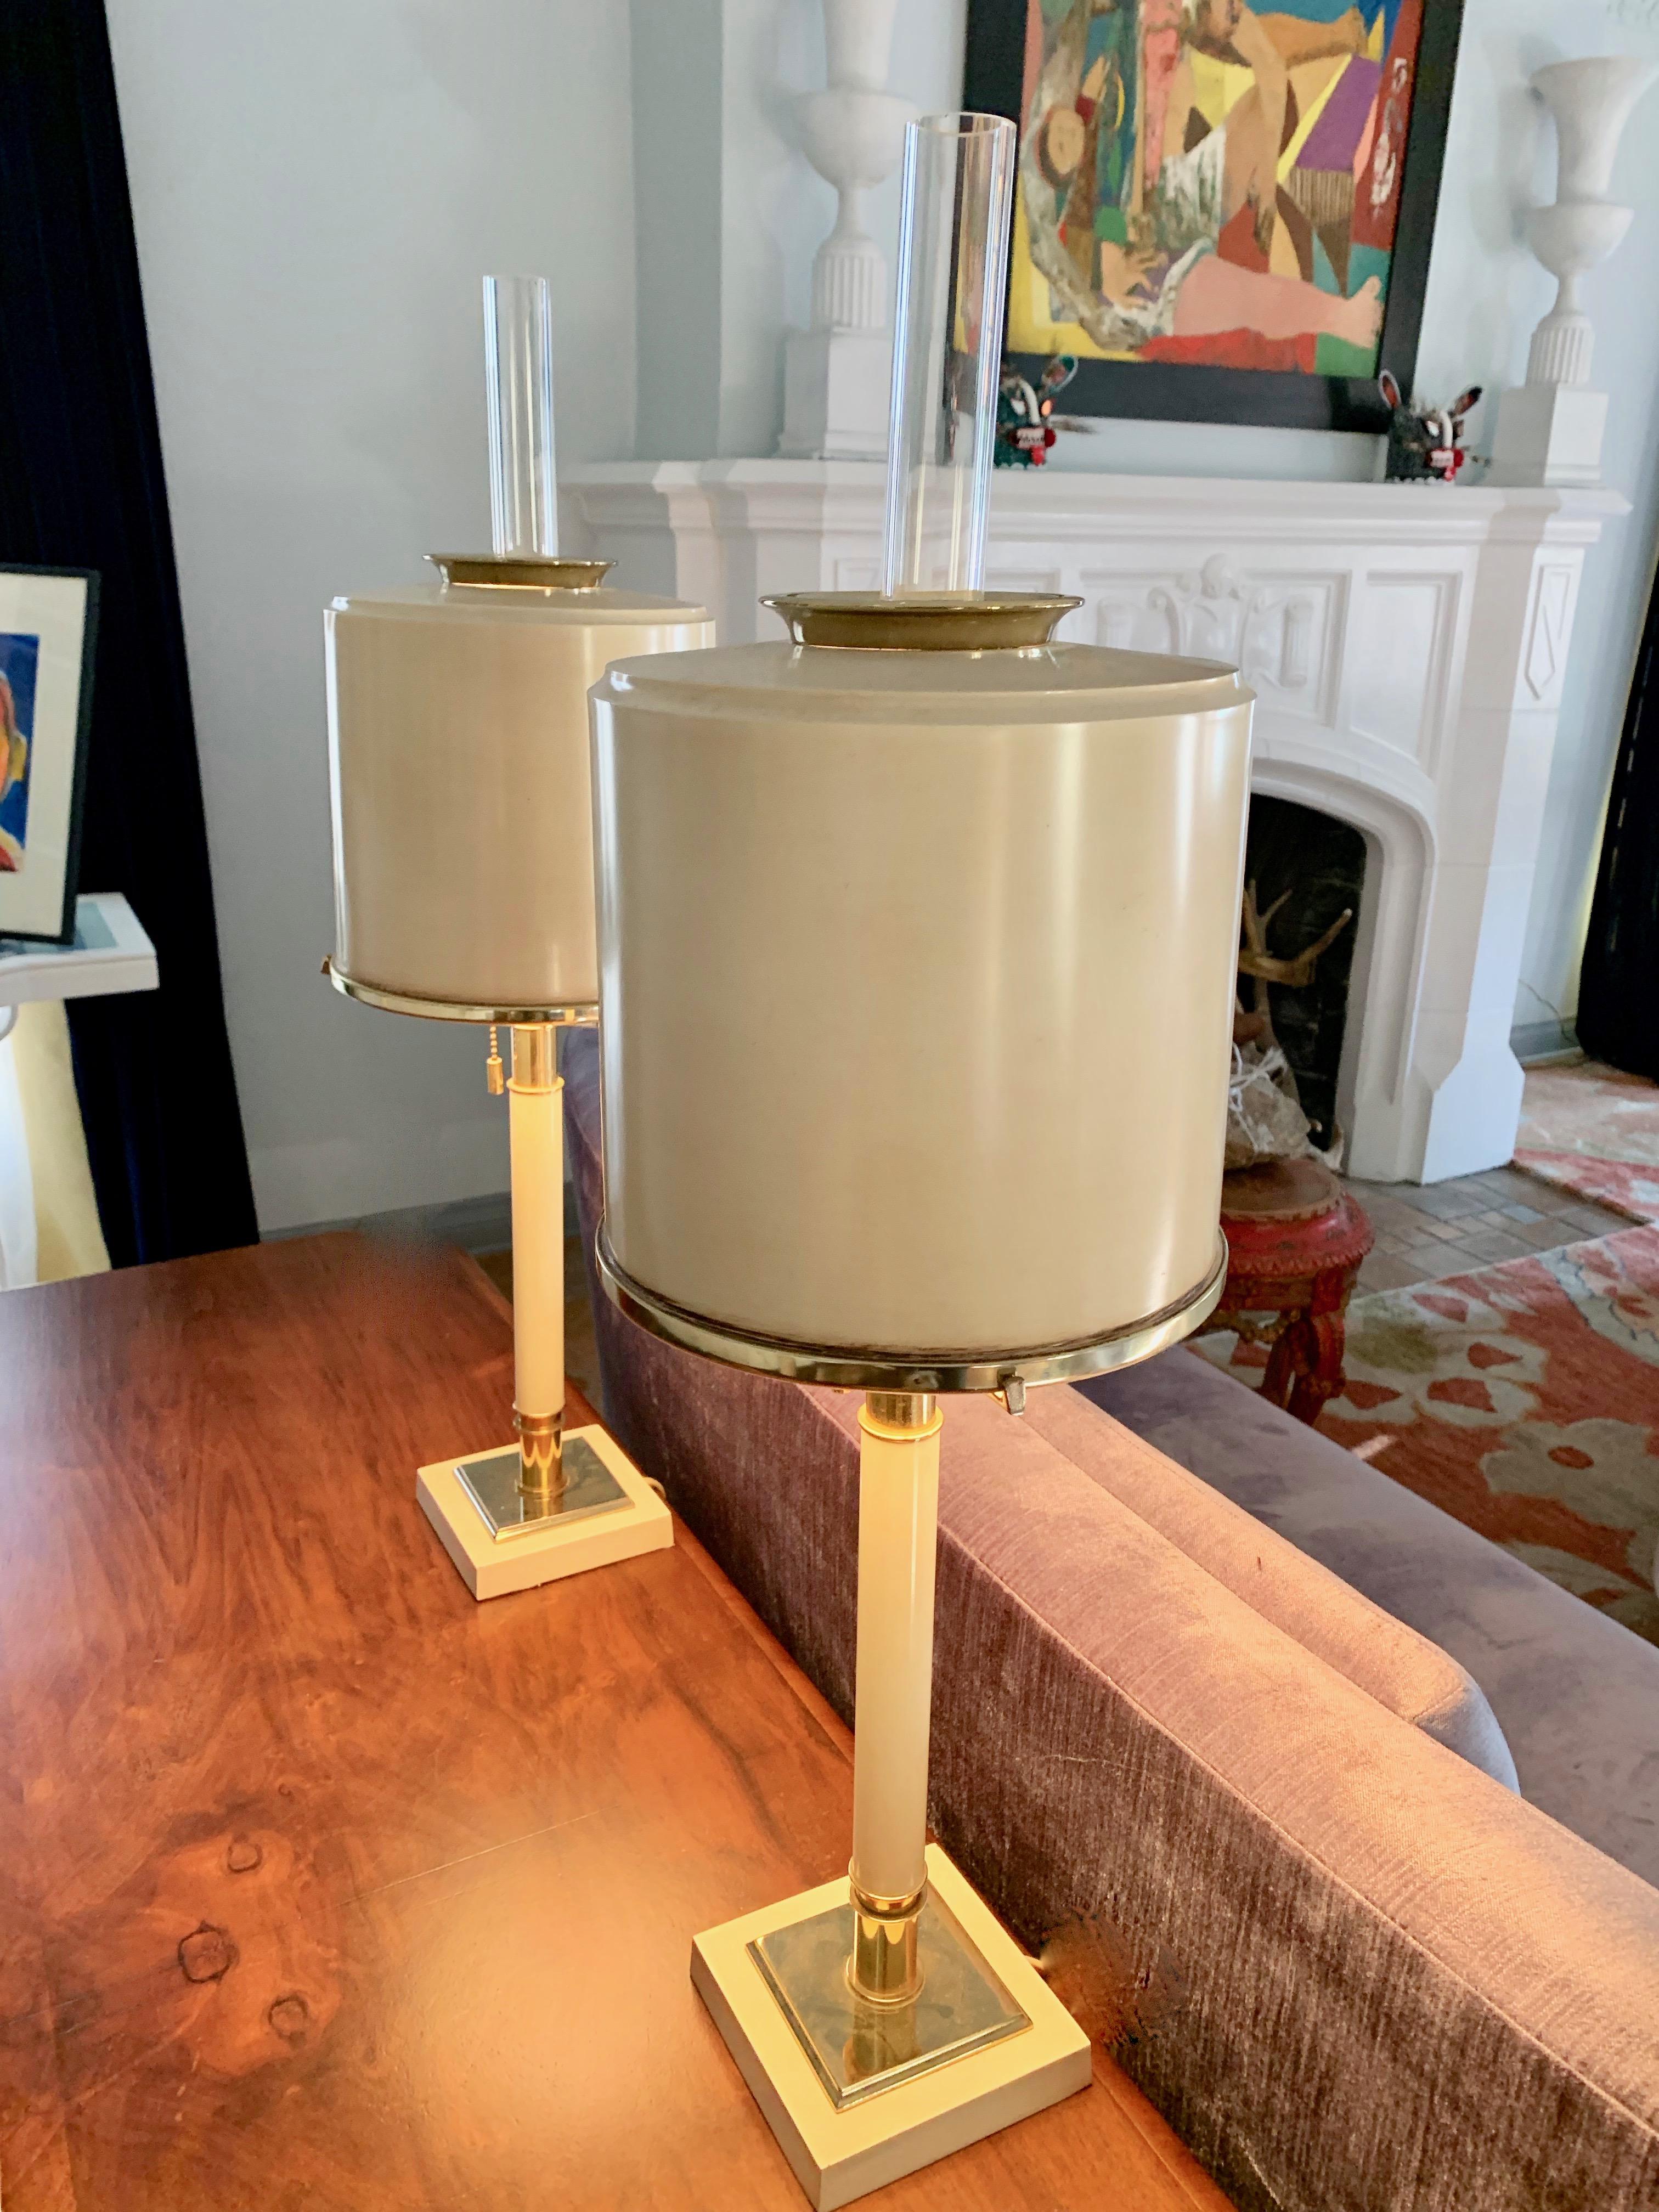 A wonderful modern pair of midcentury lamps by Laurel Lamp Company. 

The handsome pair are a cream colored metal with brass details and a three prong support for a dome of metal and finials in thick tubular glass. Great for any room. Laurel is